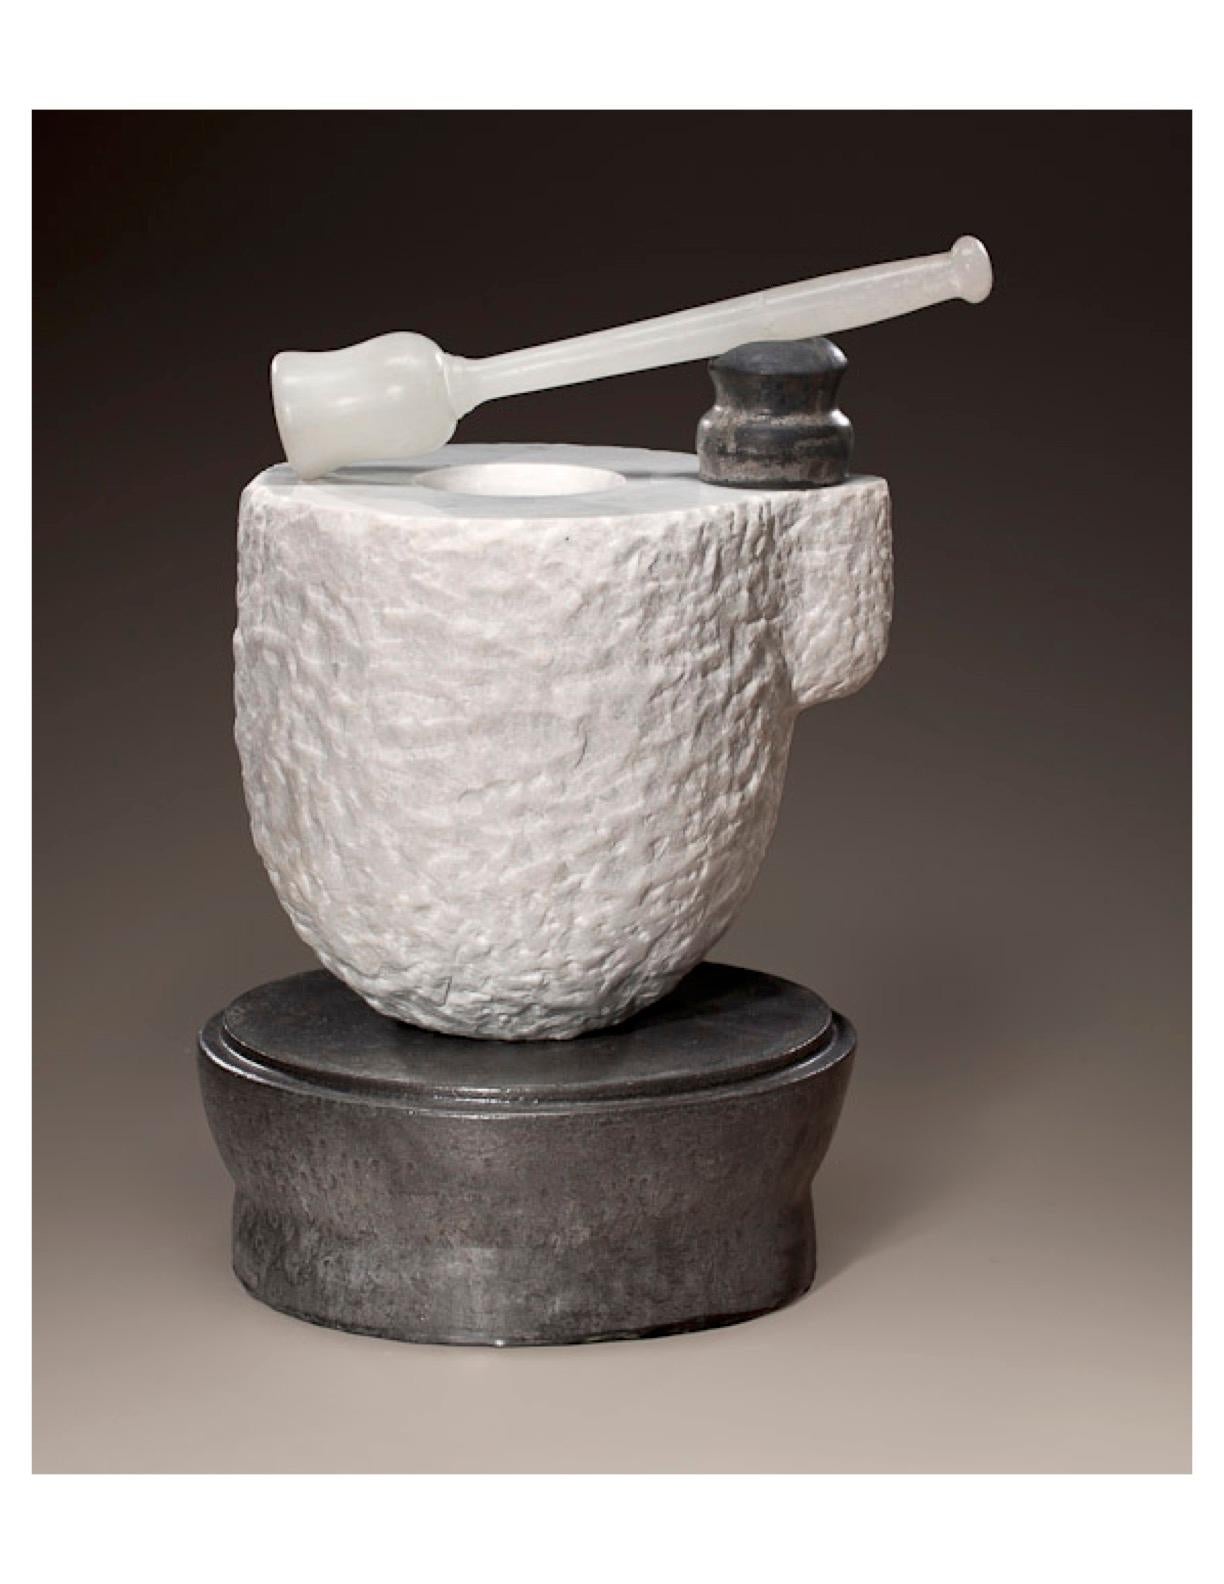 Contemporary Richard Hirsch White Marble Mortar and Glass Pestle Sculpture, 2006 - 2010 For Sale